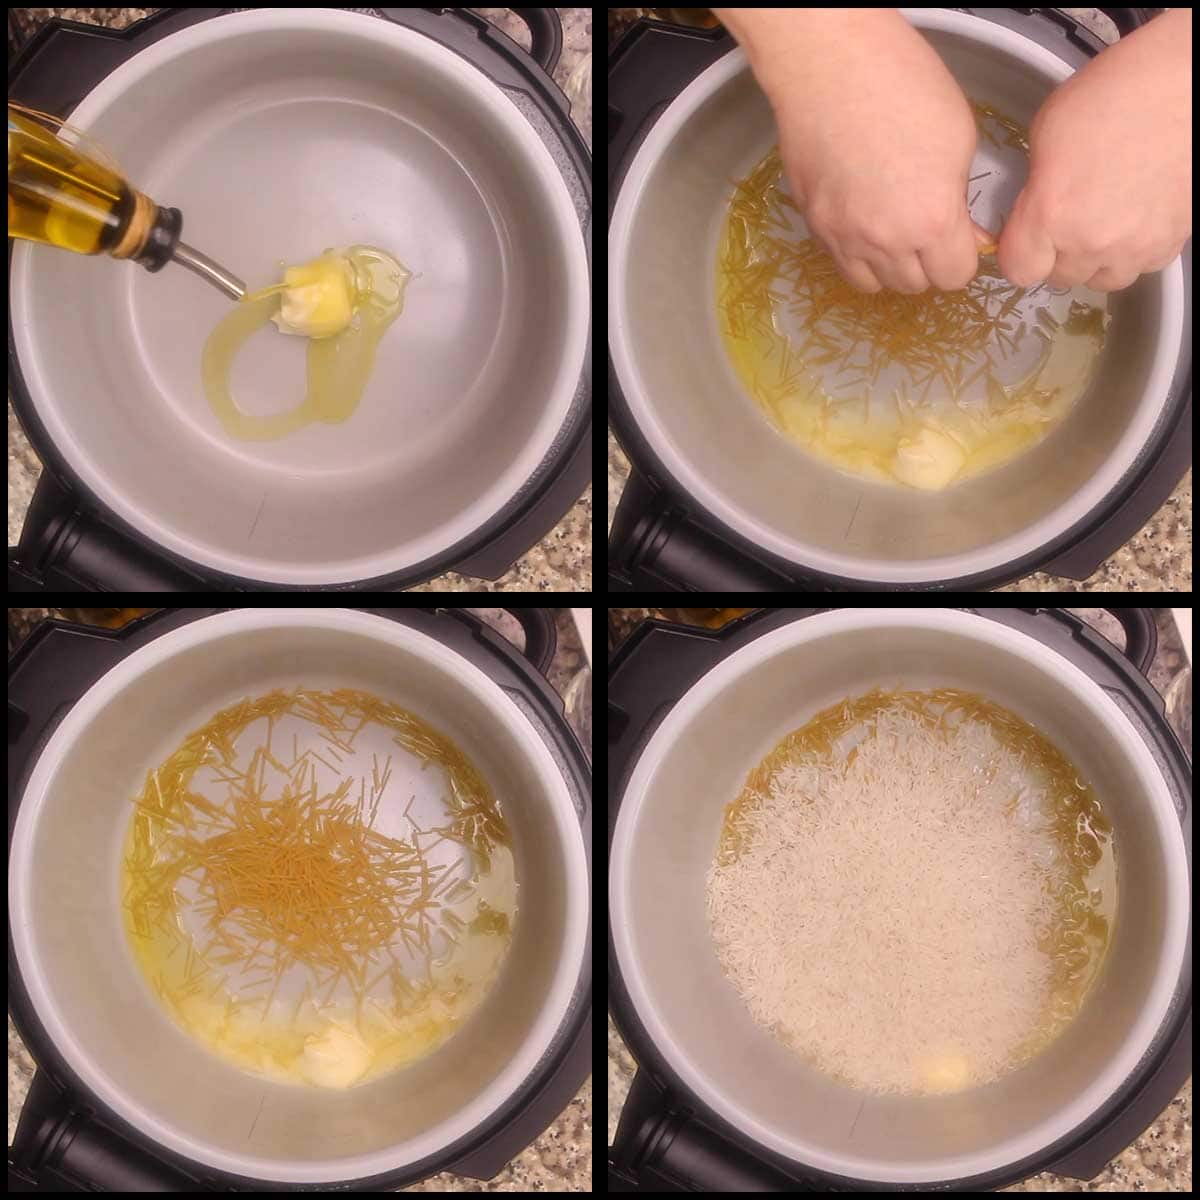 adding the vermicelli and rice to hot butter and oil